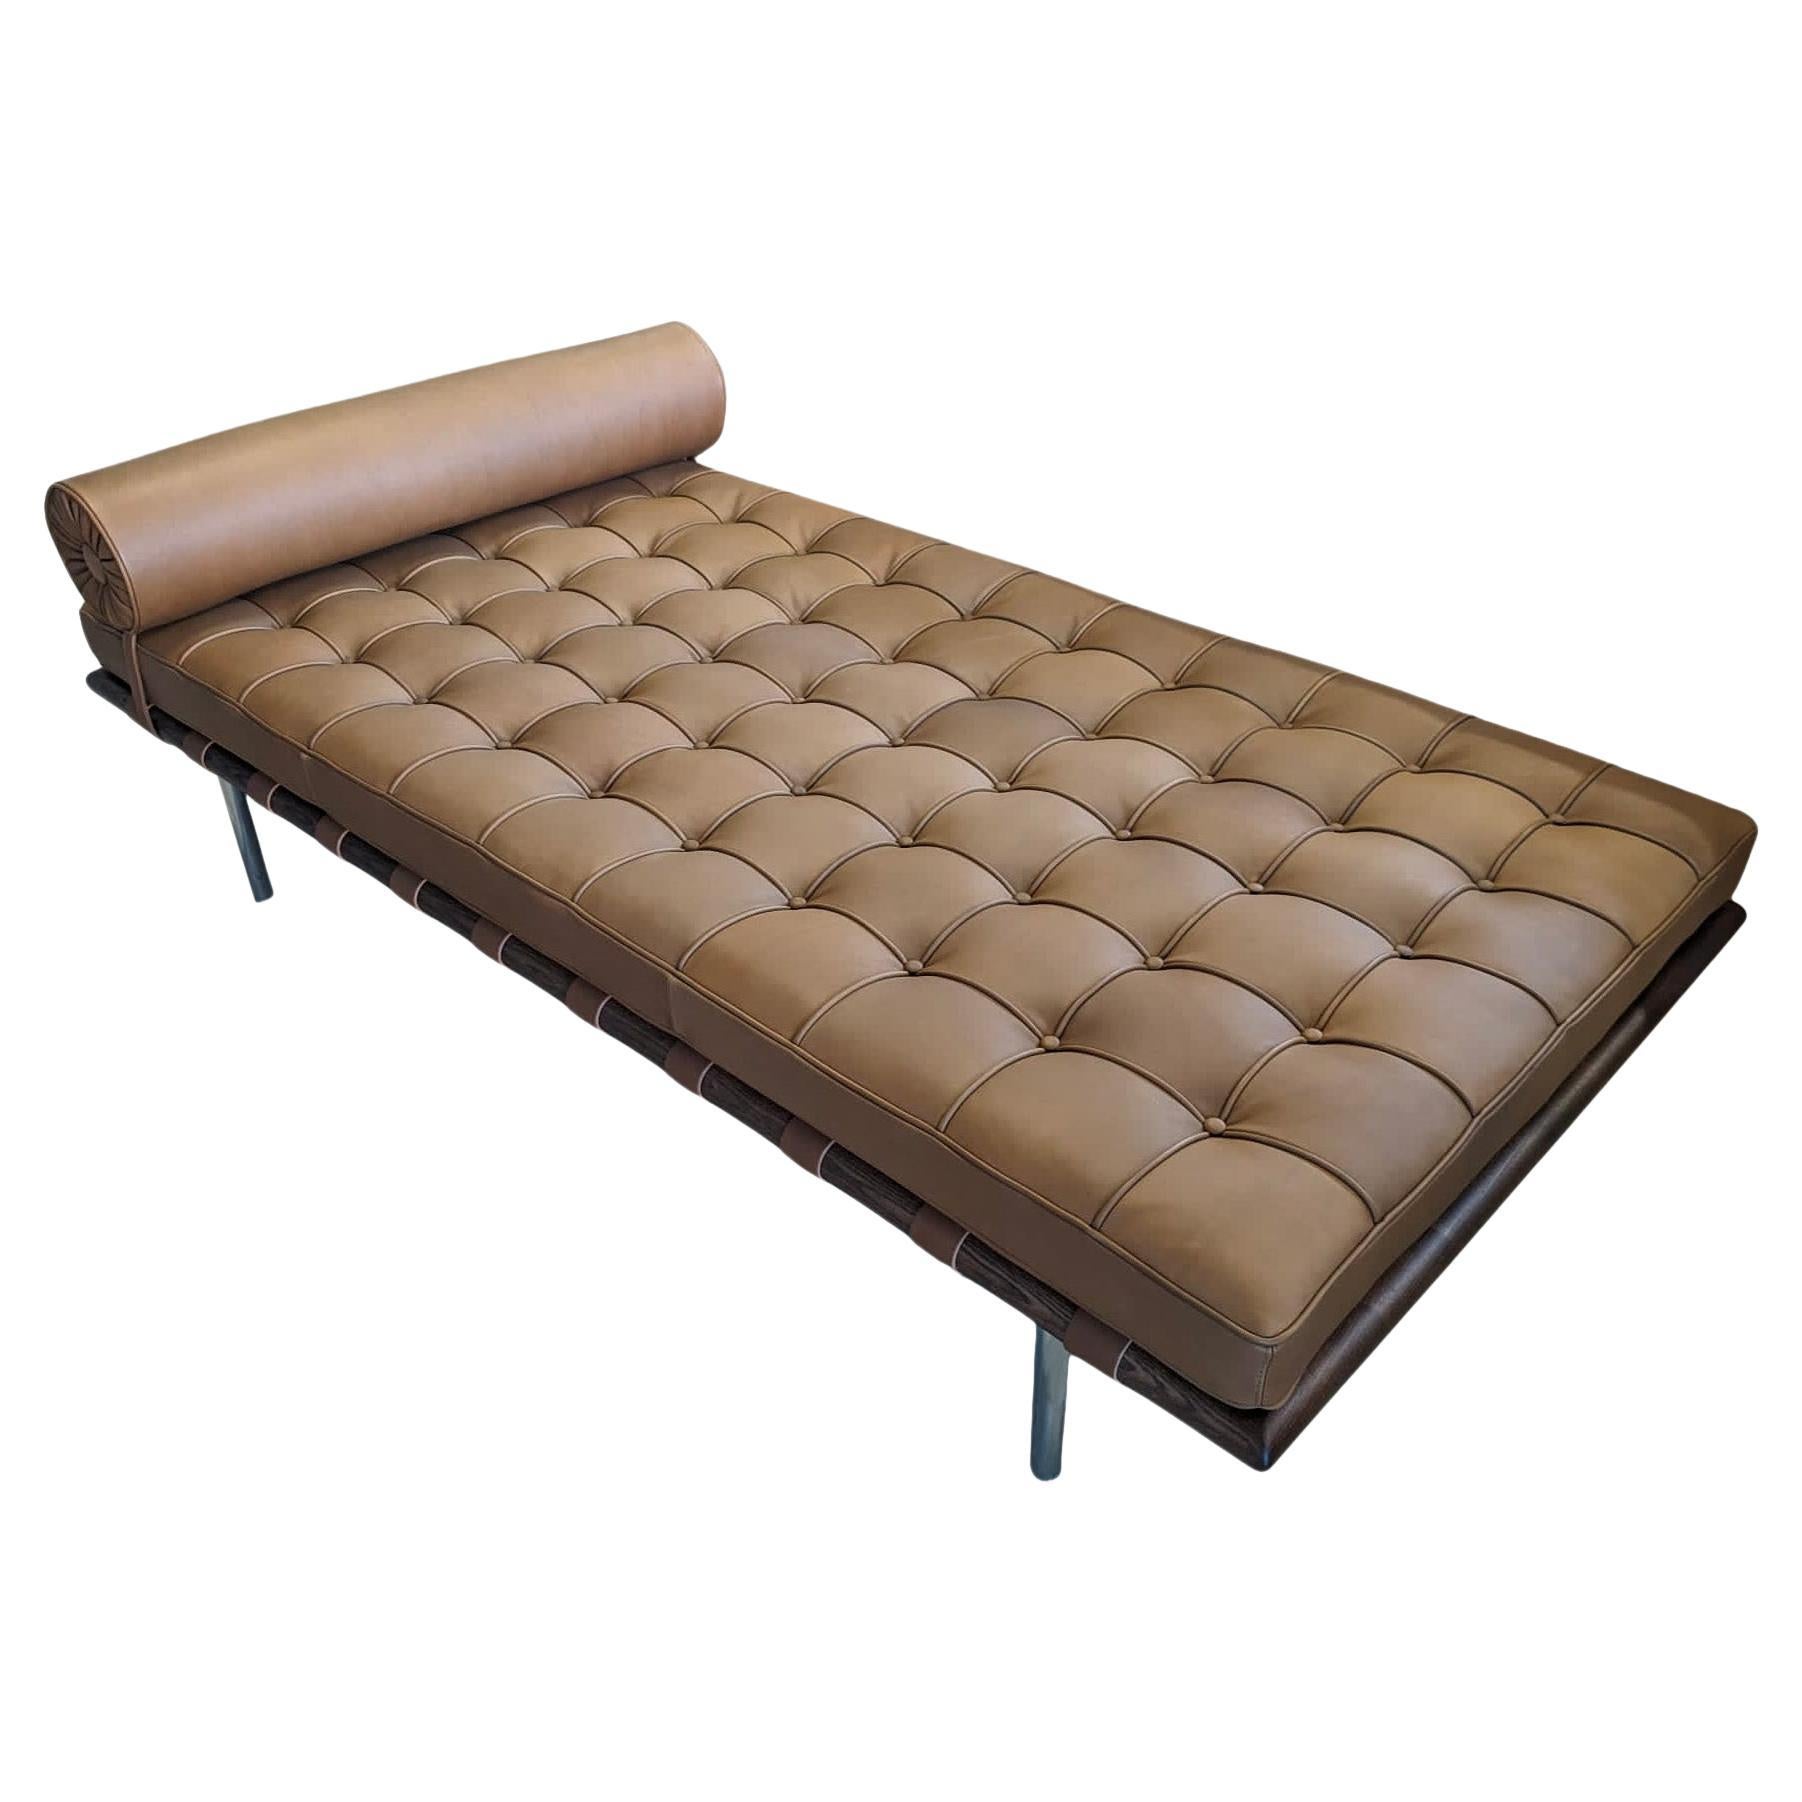 Ludwig Mies Van Der Rohe Bauhaus Coffee Leather Barcelona Daybed for Knoll, 1970 For Sale